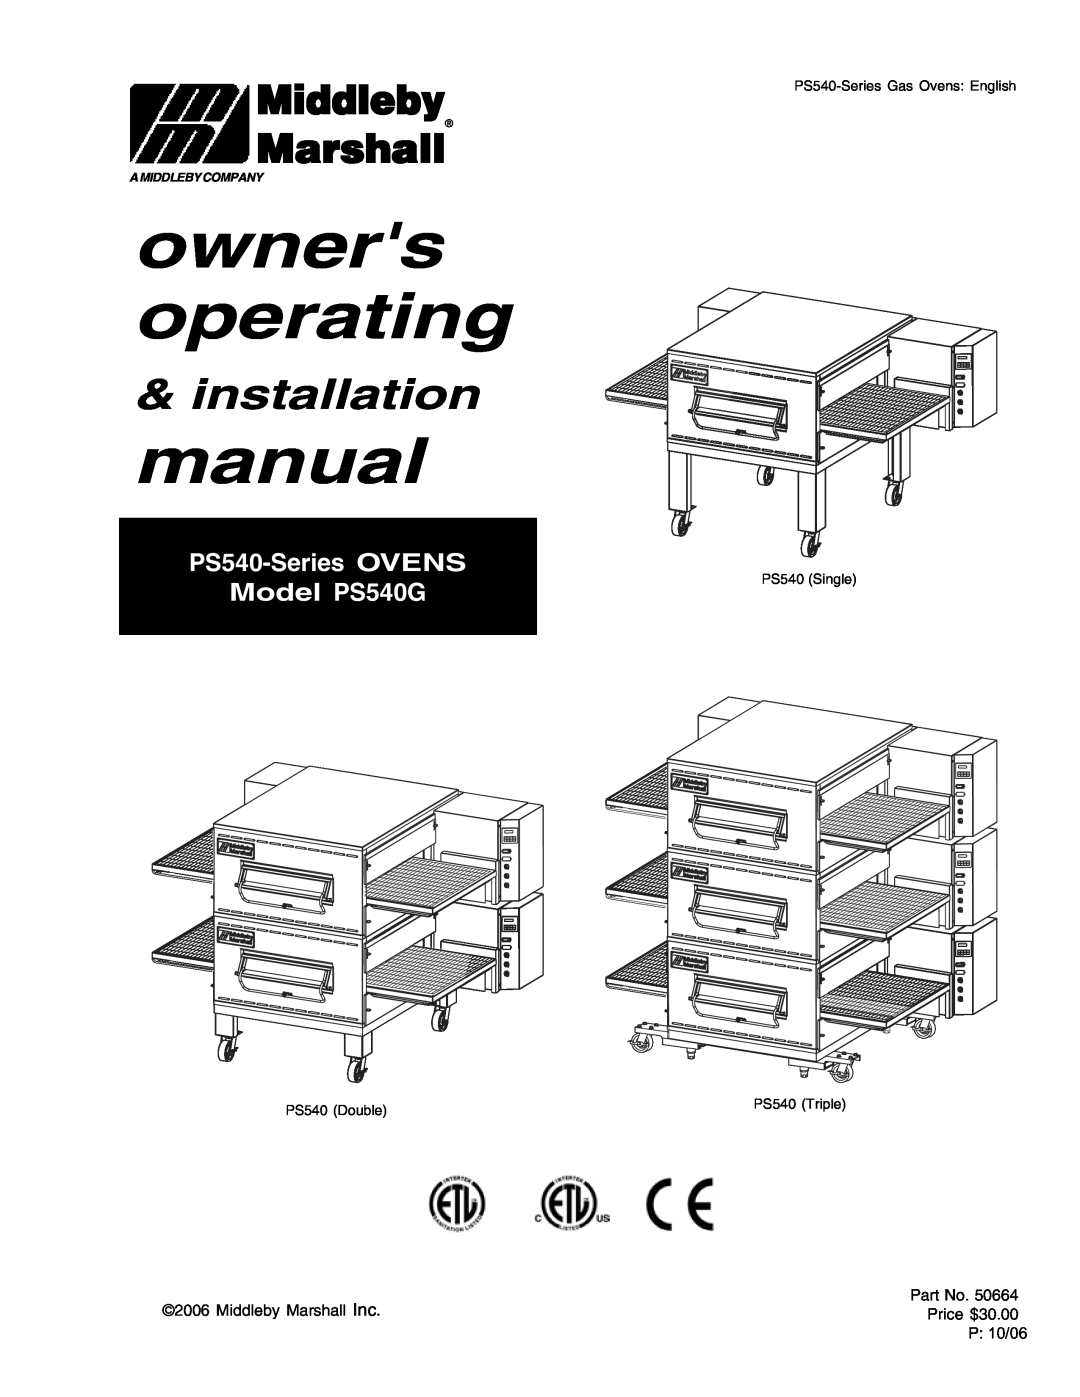 Middleby Marshall installation manual owners operating, Middleby, Marshall, PS540-SeriesOVENS Model PS540G, P: 10/06 